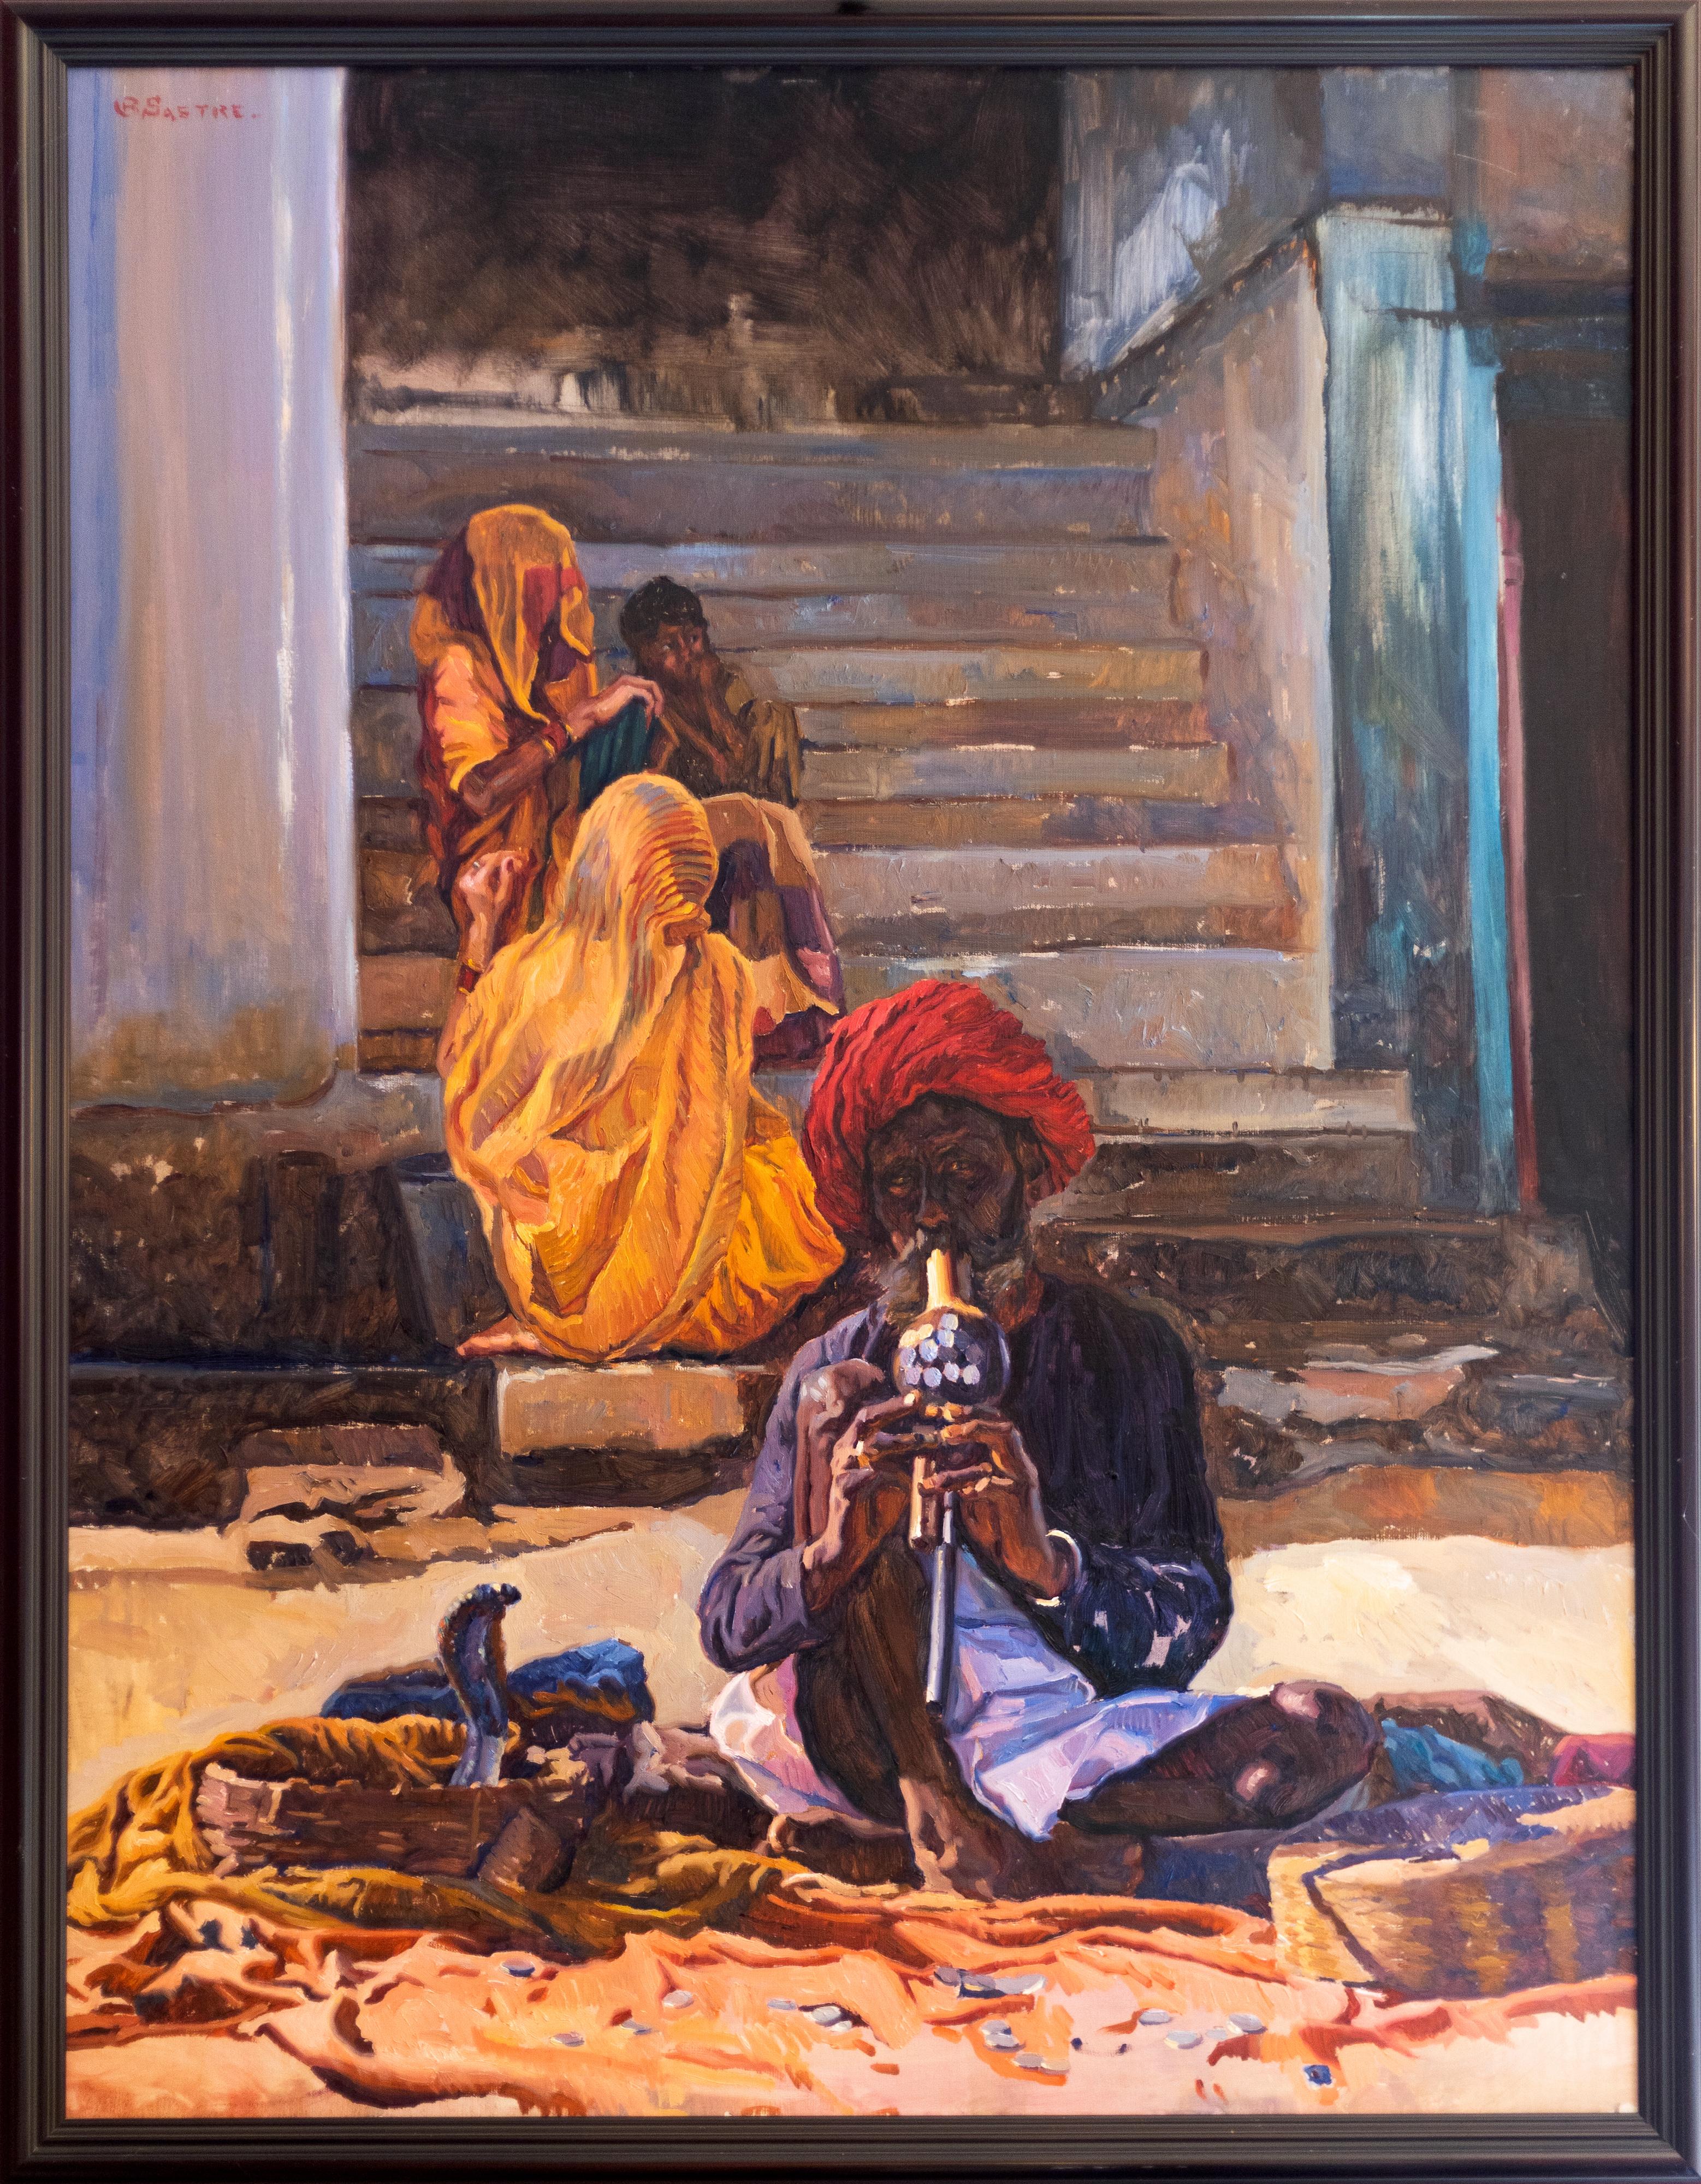 Snake Charmer - Painting by Bartolome Sastre